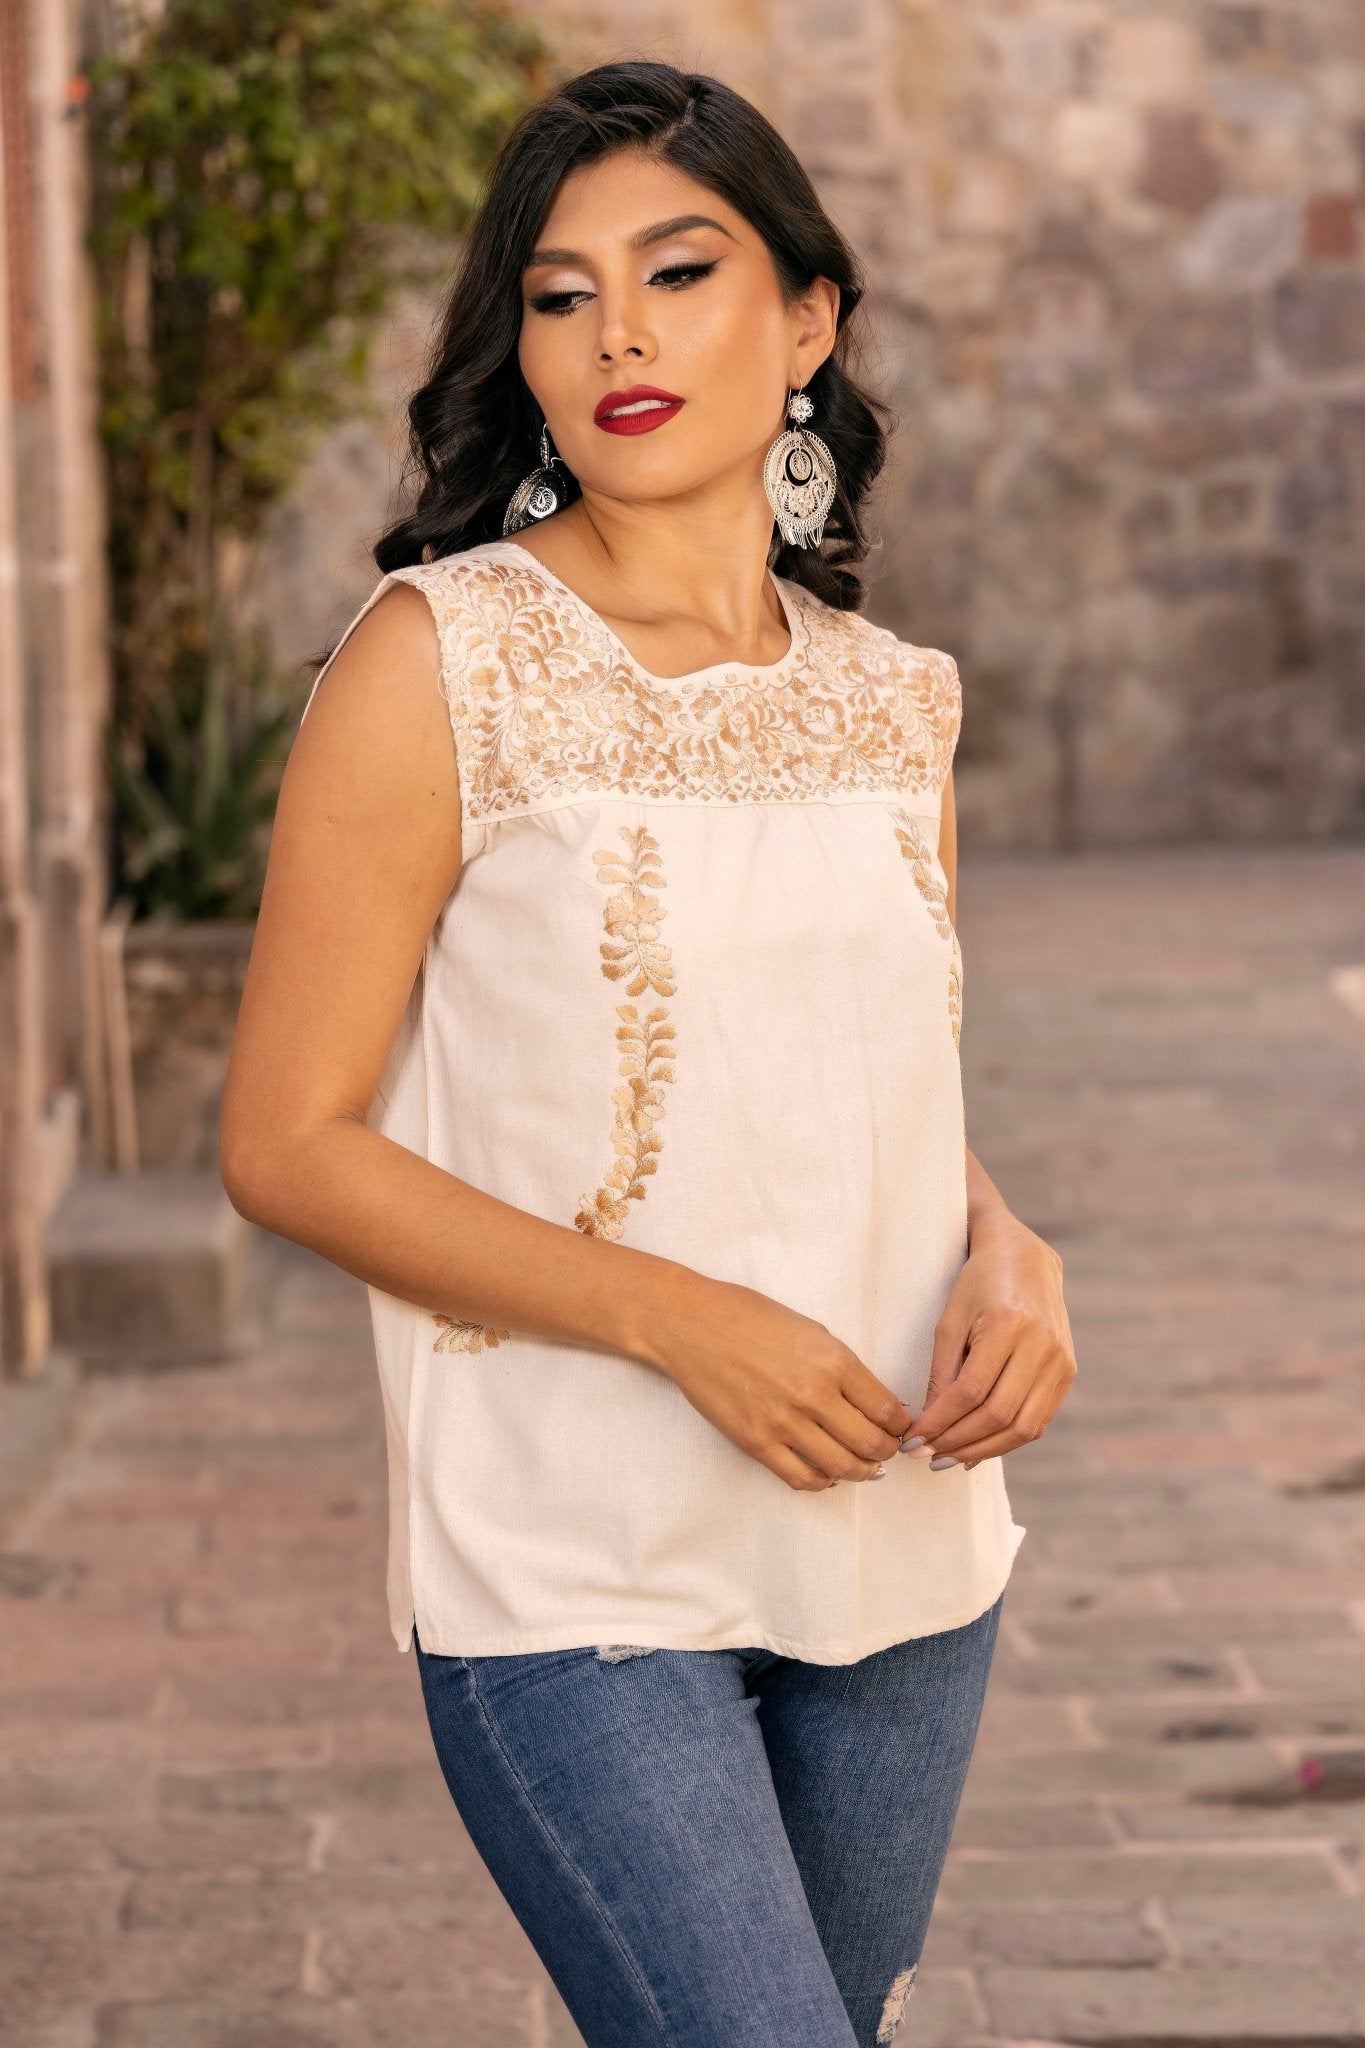 Mexican Hand Embroidered Gold Floral Top. Antonina Golden Blouse. - Solei Store